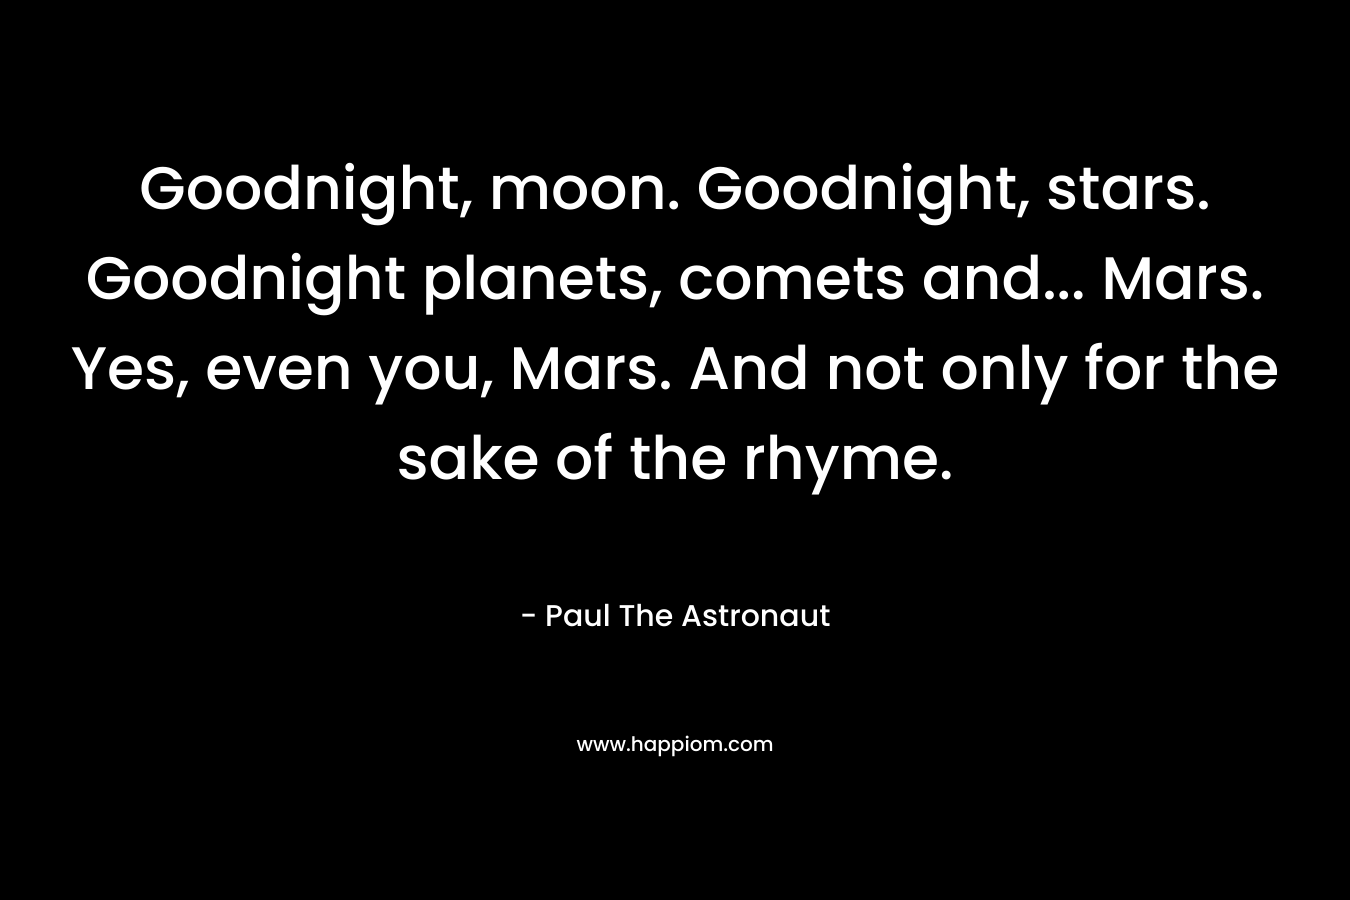 Goodnight, moon. Goodnight, stars. Goodnight planets, comets and… Mars. Yes, even you, Mars. And not only for the sake of the rhyme. – Paul The Astronaut